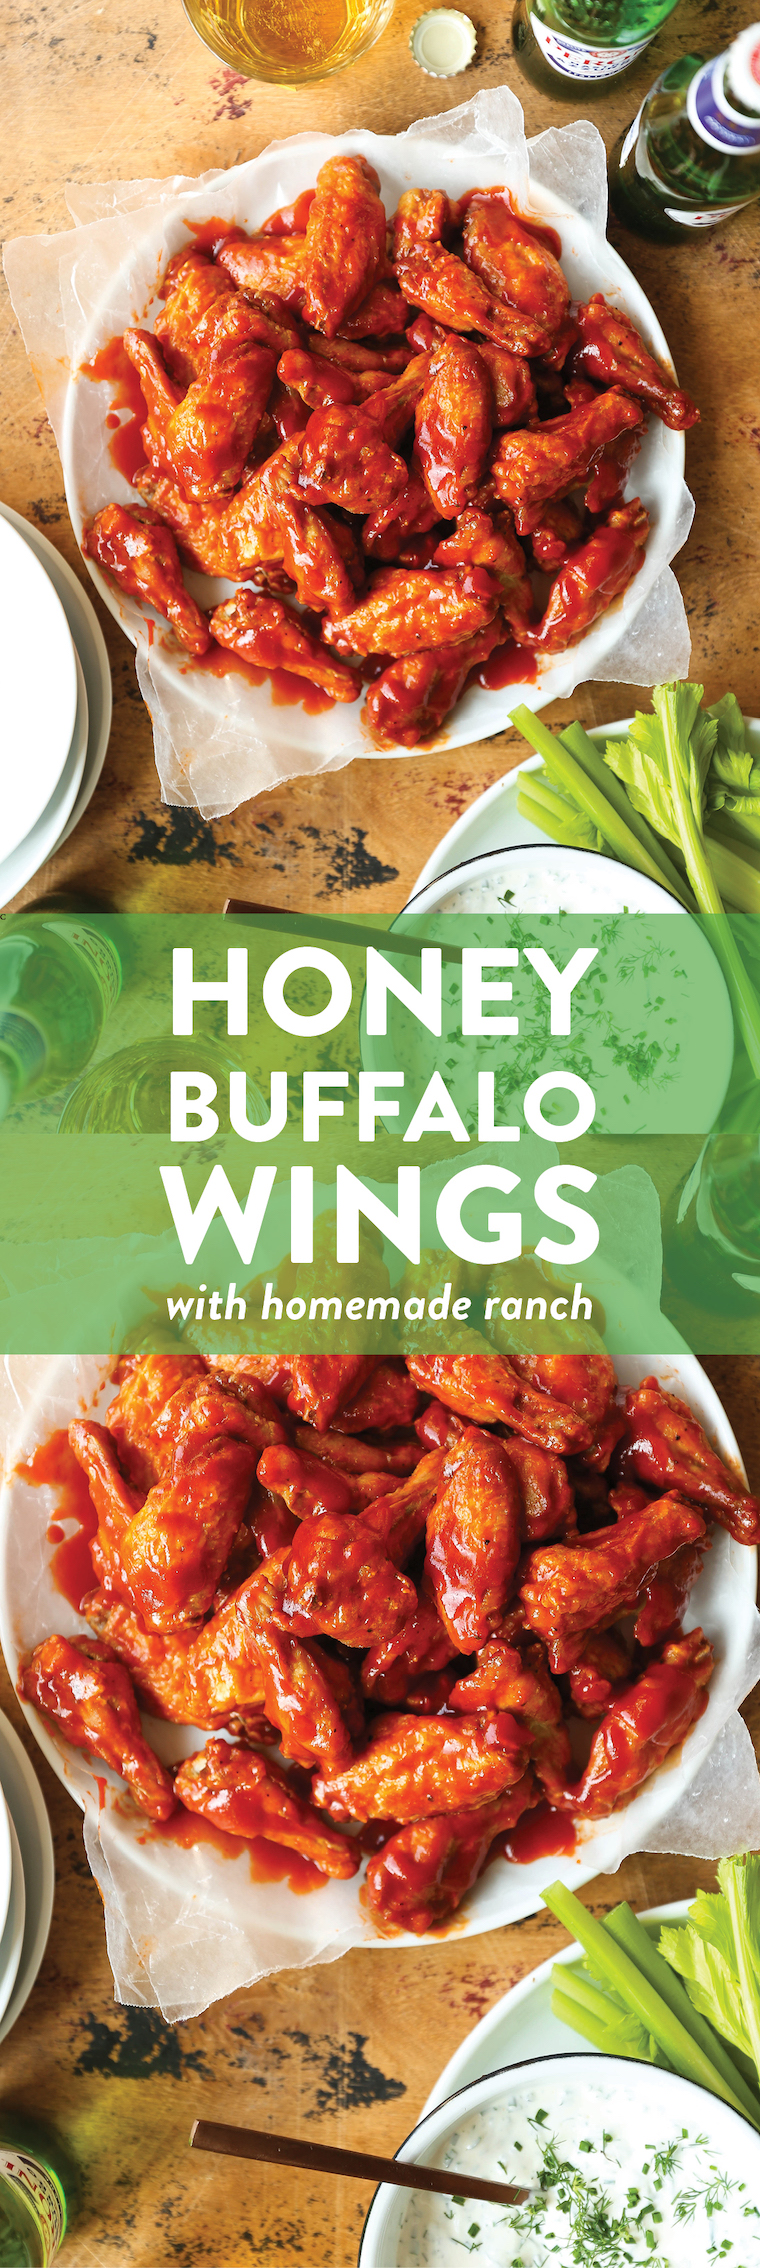 Honey Buffalo Wings with Homemade Ranch - So crispy, so sticky, so finger-licking amazing!!! Plus, the homemade Ranch? MIND BLOWN. Pass the beer, please!!!